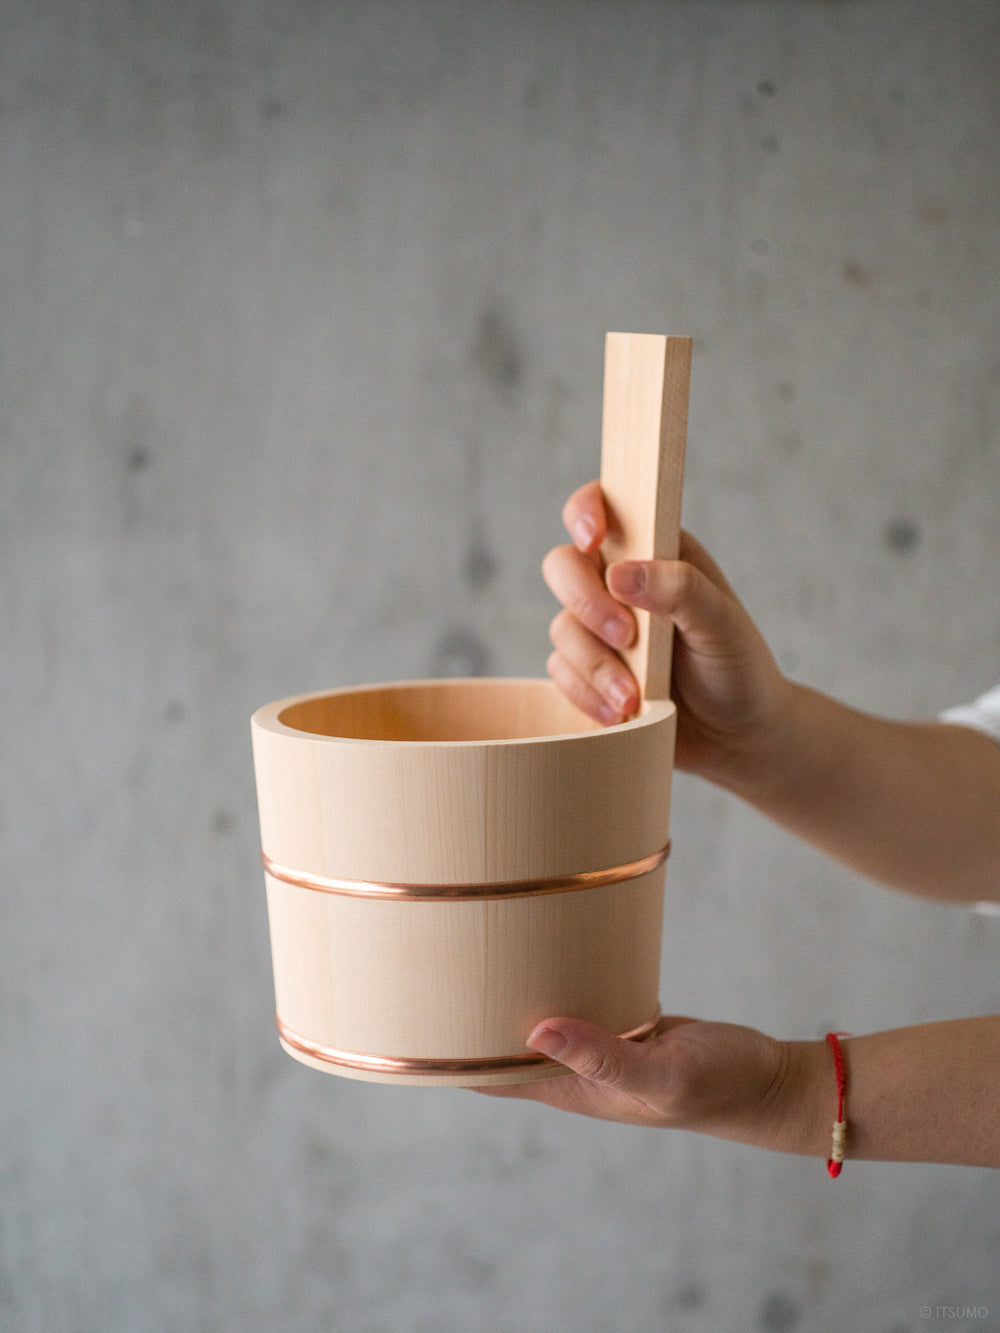 Hands holding a hinoki wood bath bucket with a handle and copper trim